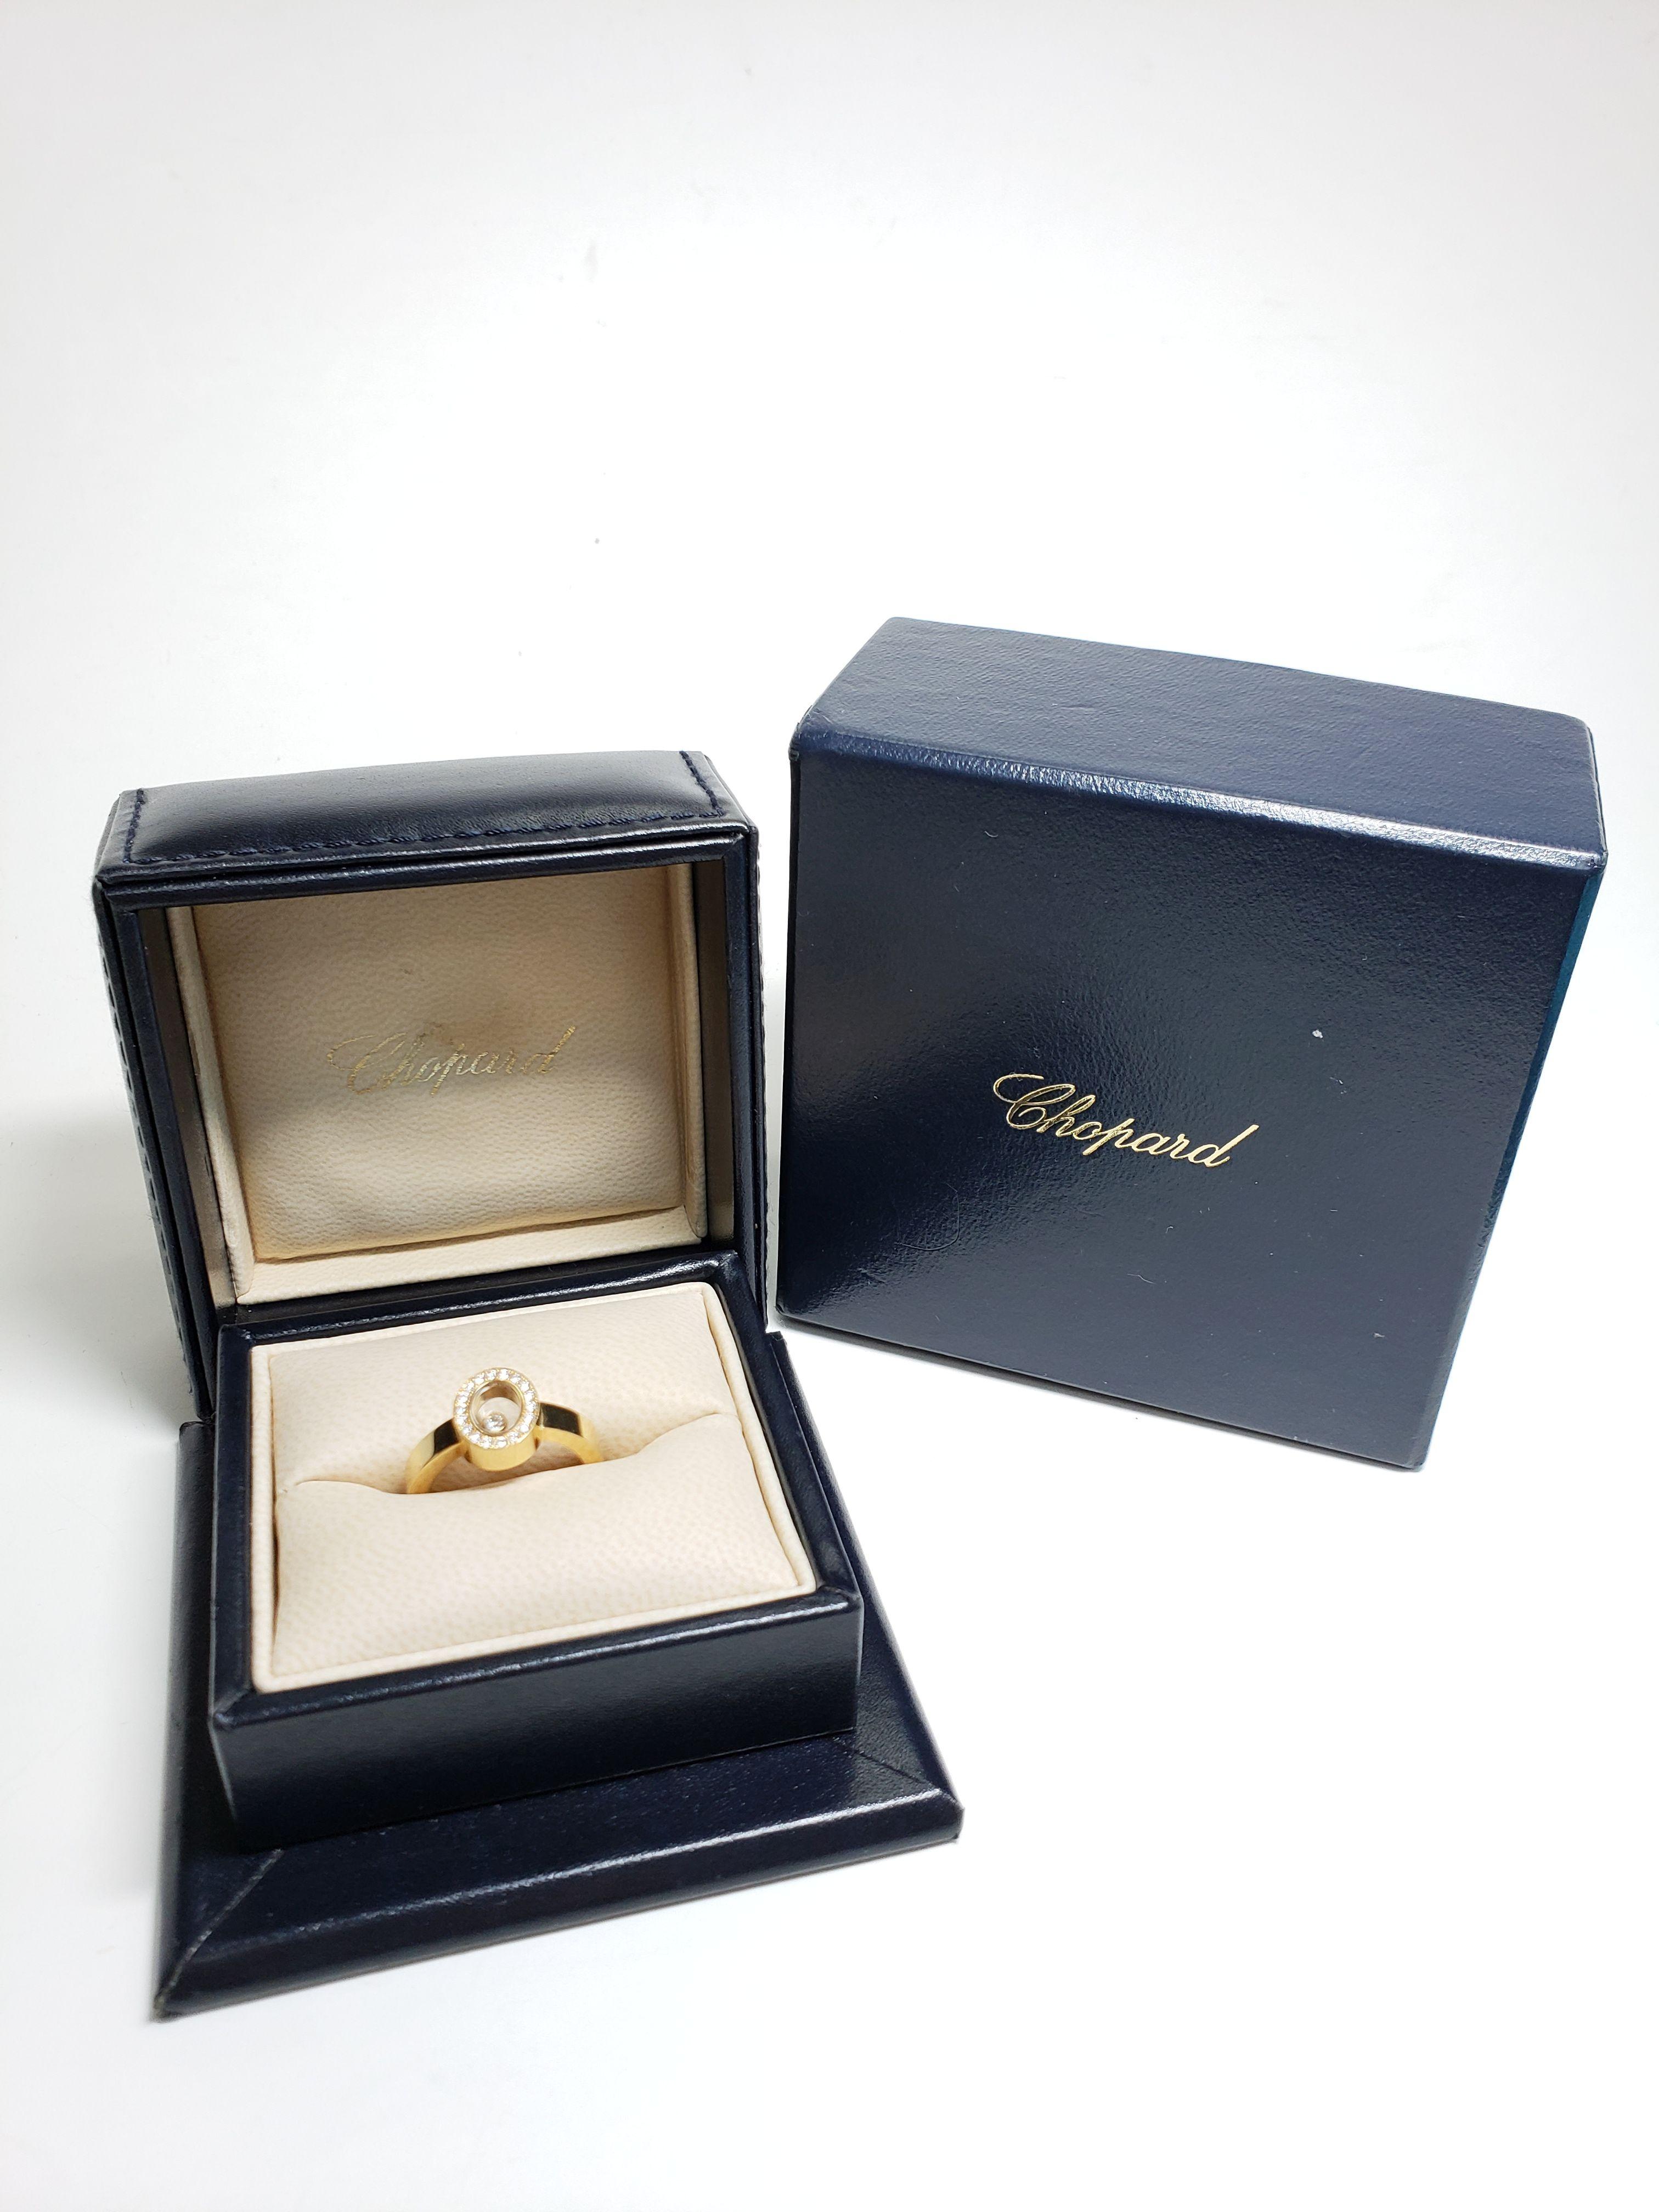 Designer Womens Chopard Floating Diamond 18k Yellow Gold Ring with Box